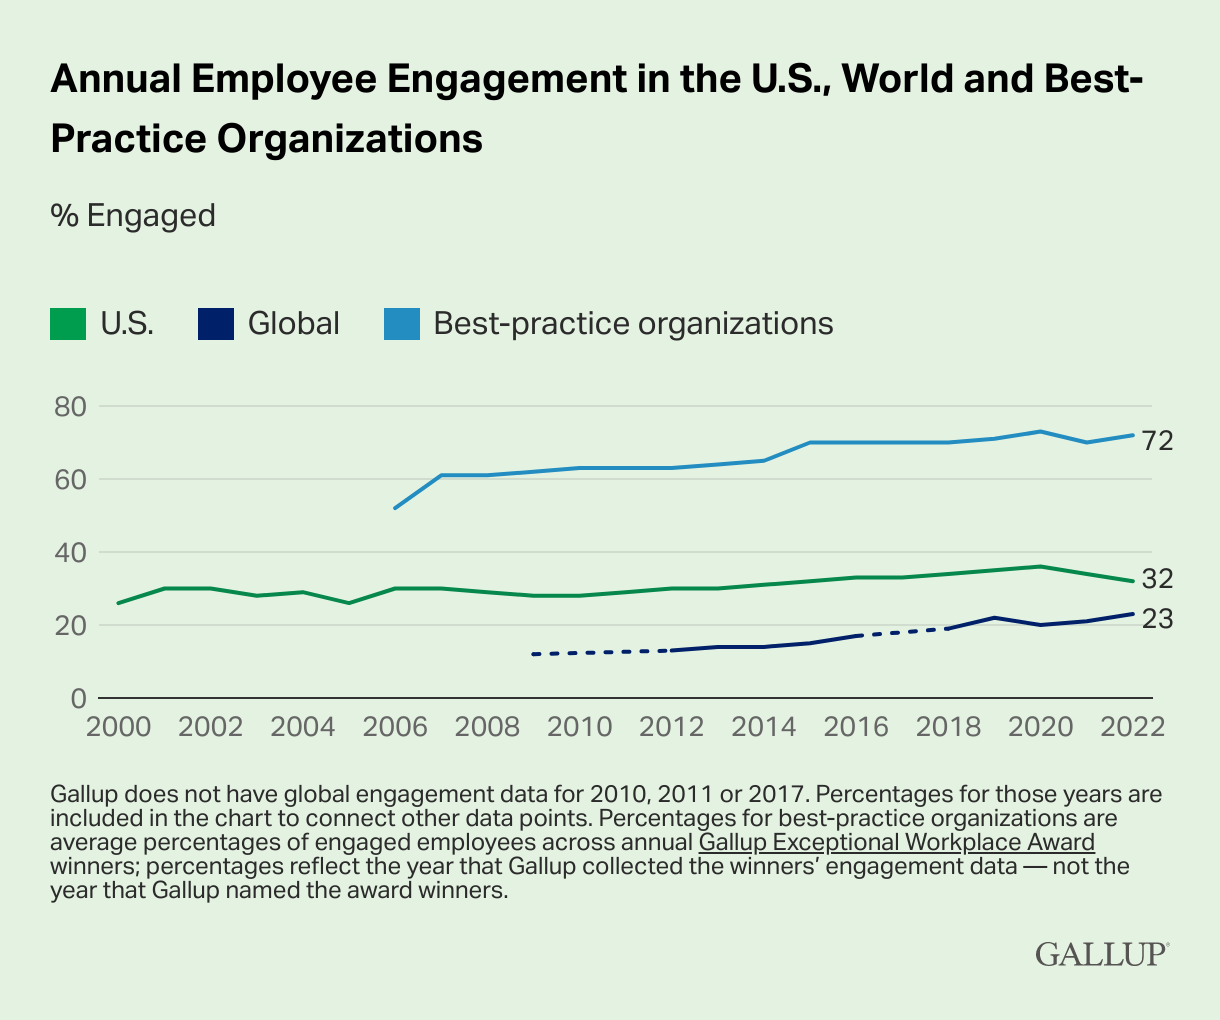 Empower employees - Gallup global employee engagement trends as of 2023